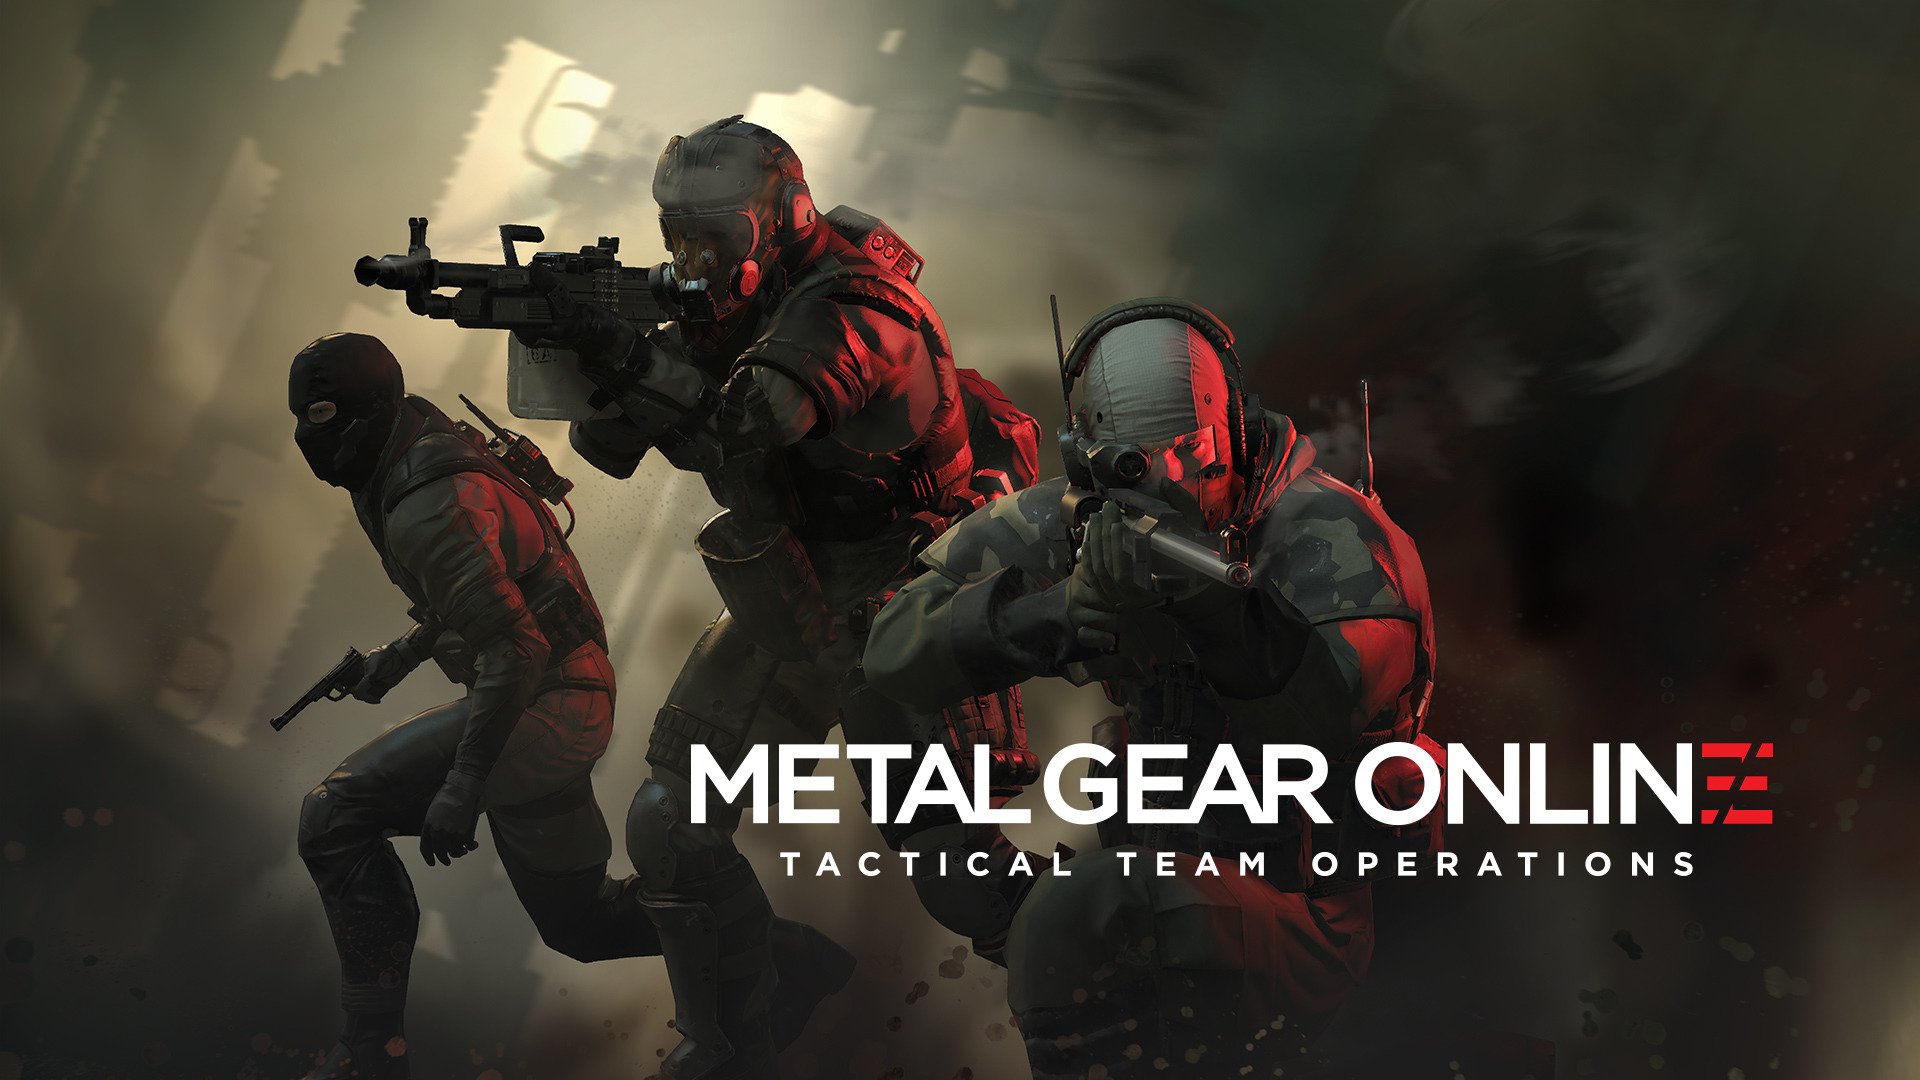 metal, Gear, Solid, Tactical, Shooter, Action, Fighting, Warrior, Military Wallpaper